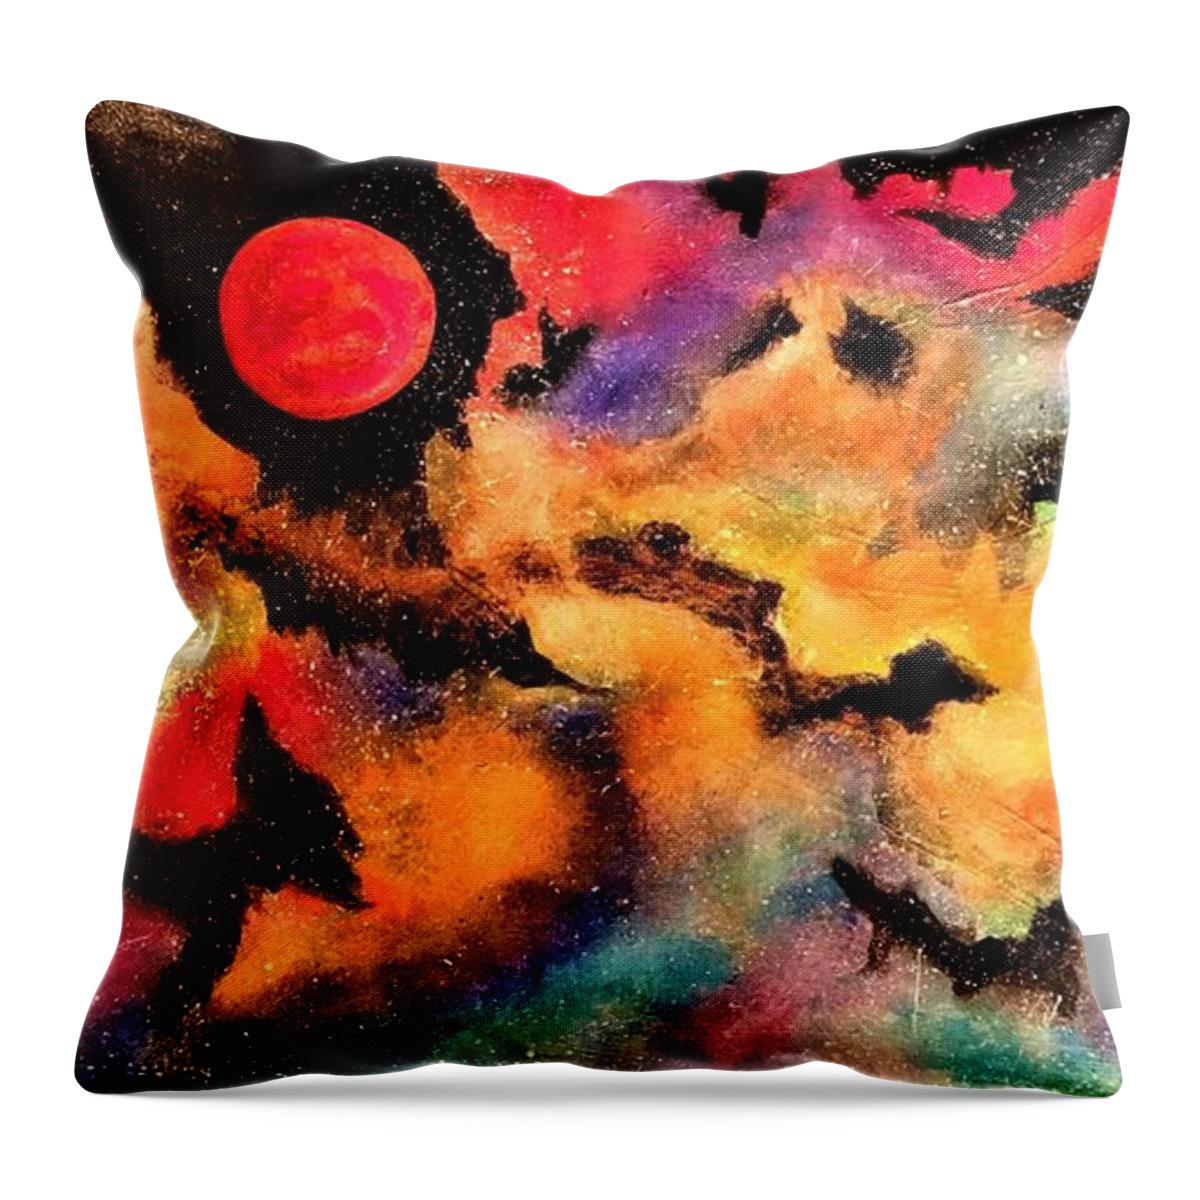 Planets Arcturus Arcturian Ascension Cosmos Universe Star Seed Nebula Space Alienworld Throw Pillow featuring the painting Infinite Infinity 2.0 by Esperanza Creeger